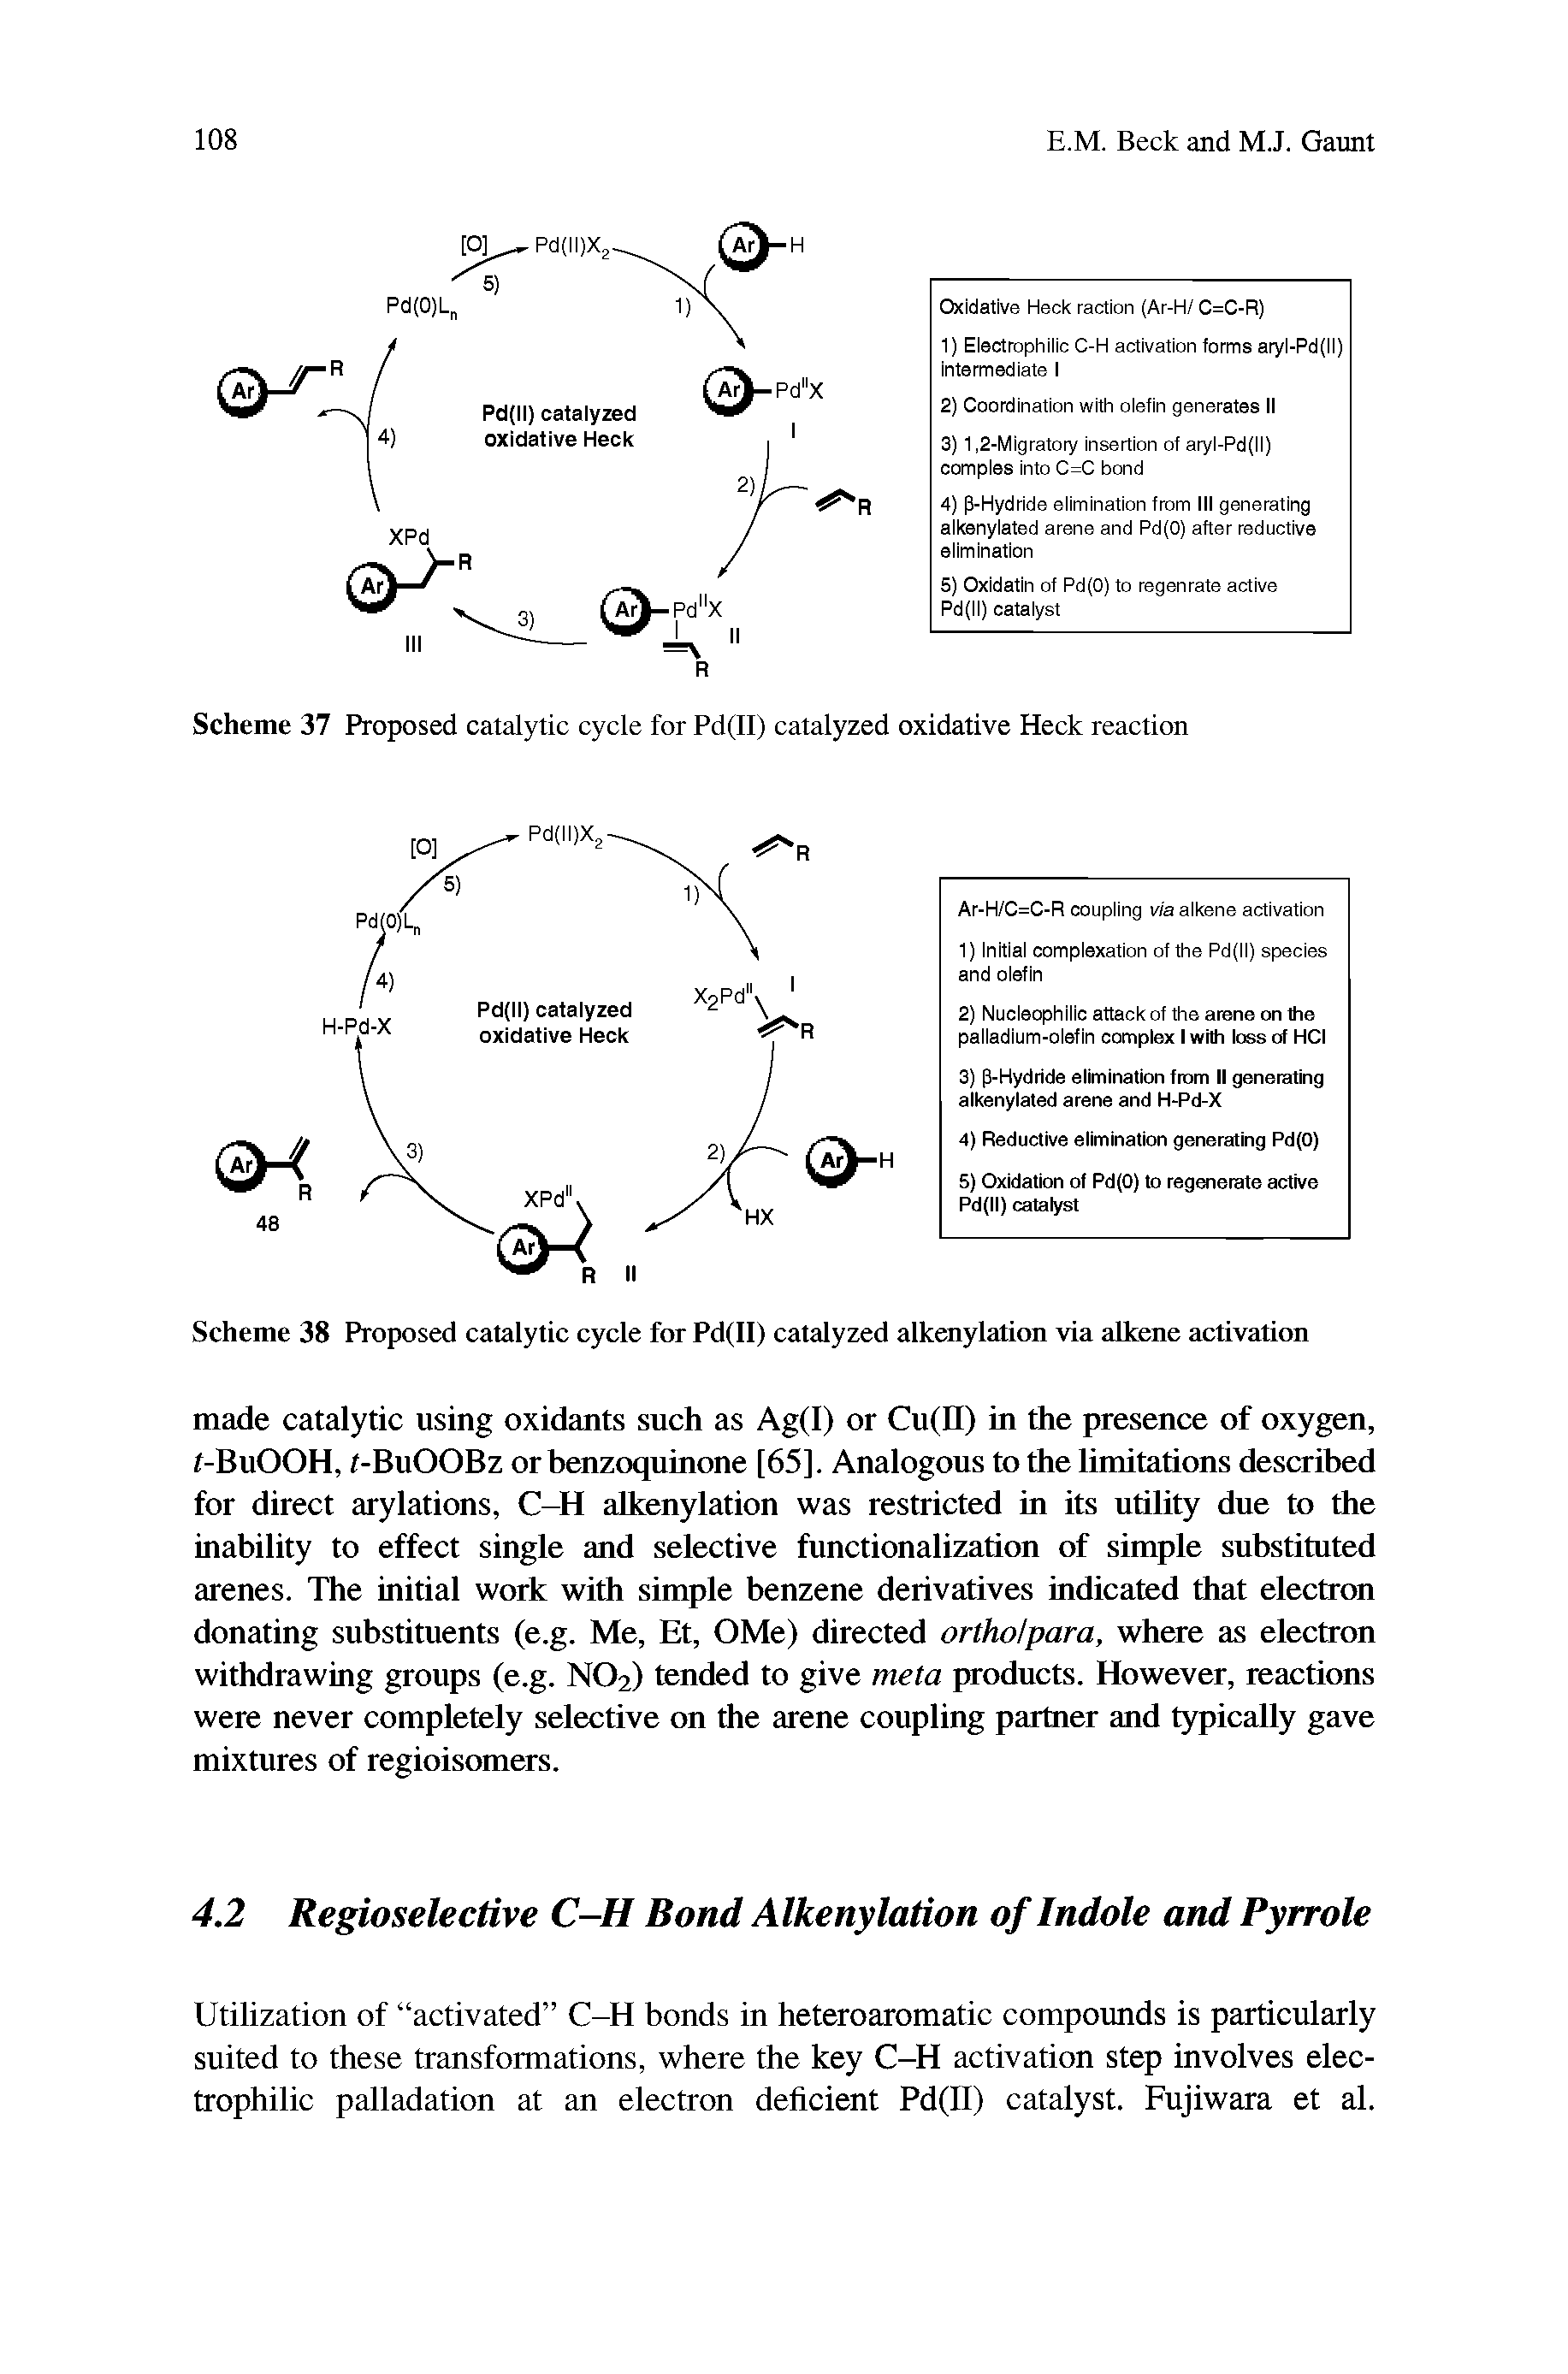 Scheme 37 Proposed catalytic cycle for Pd(II) catalyzed oxidative Heck reaction...